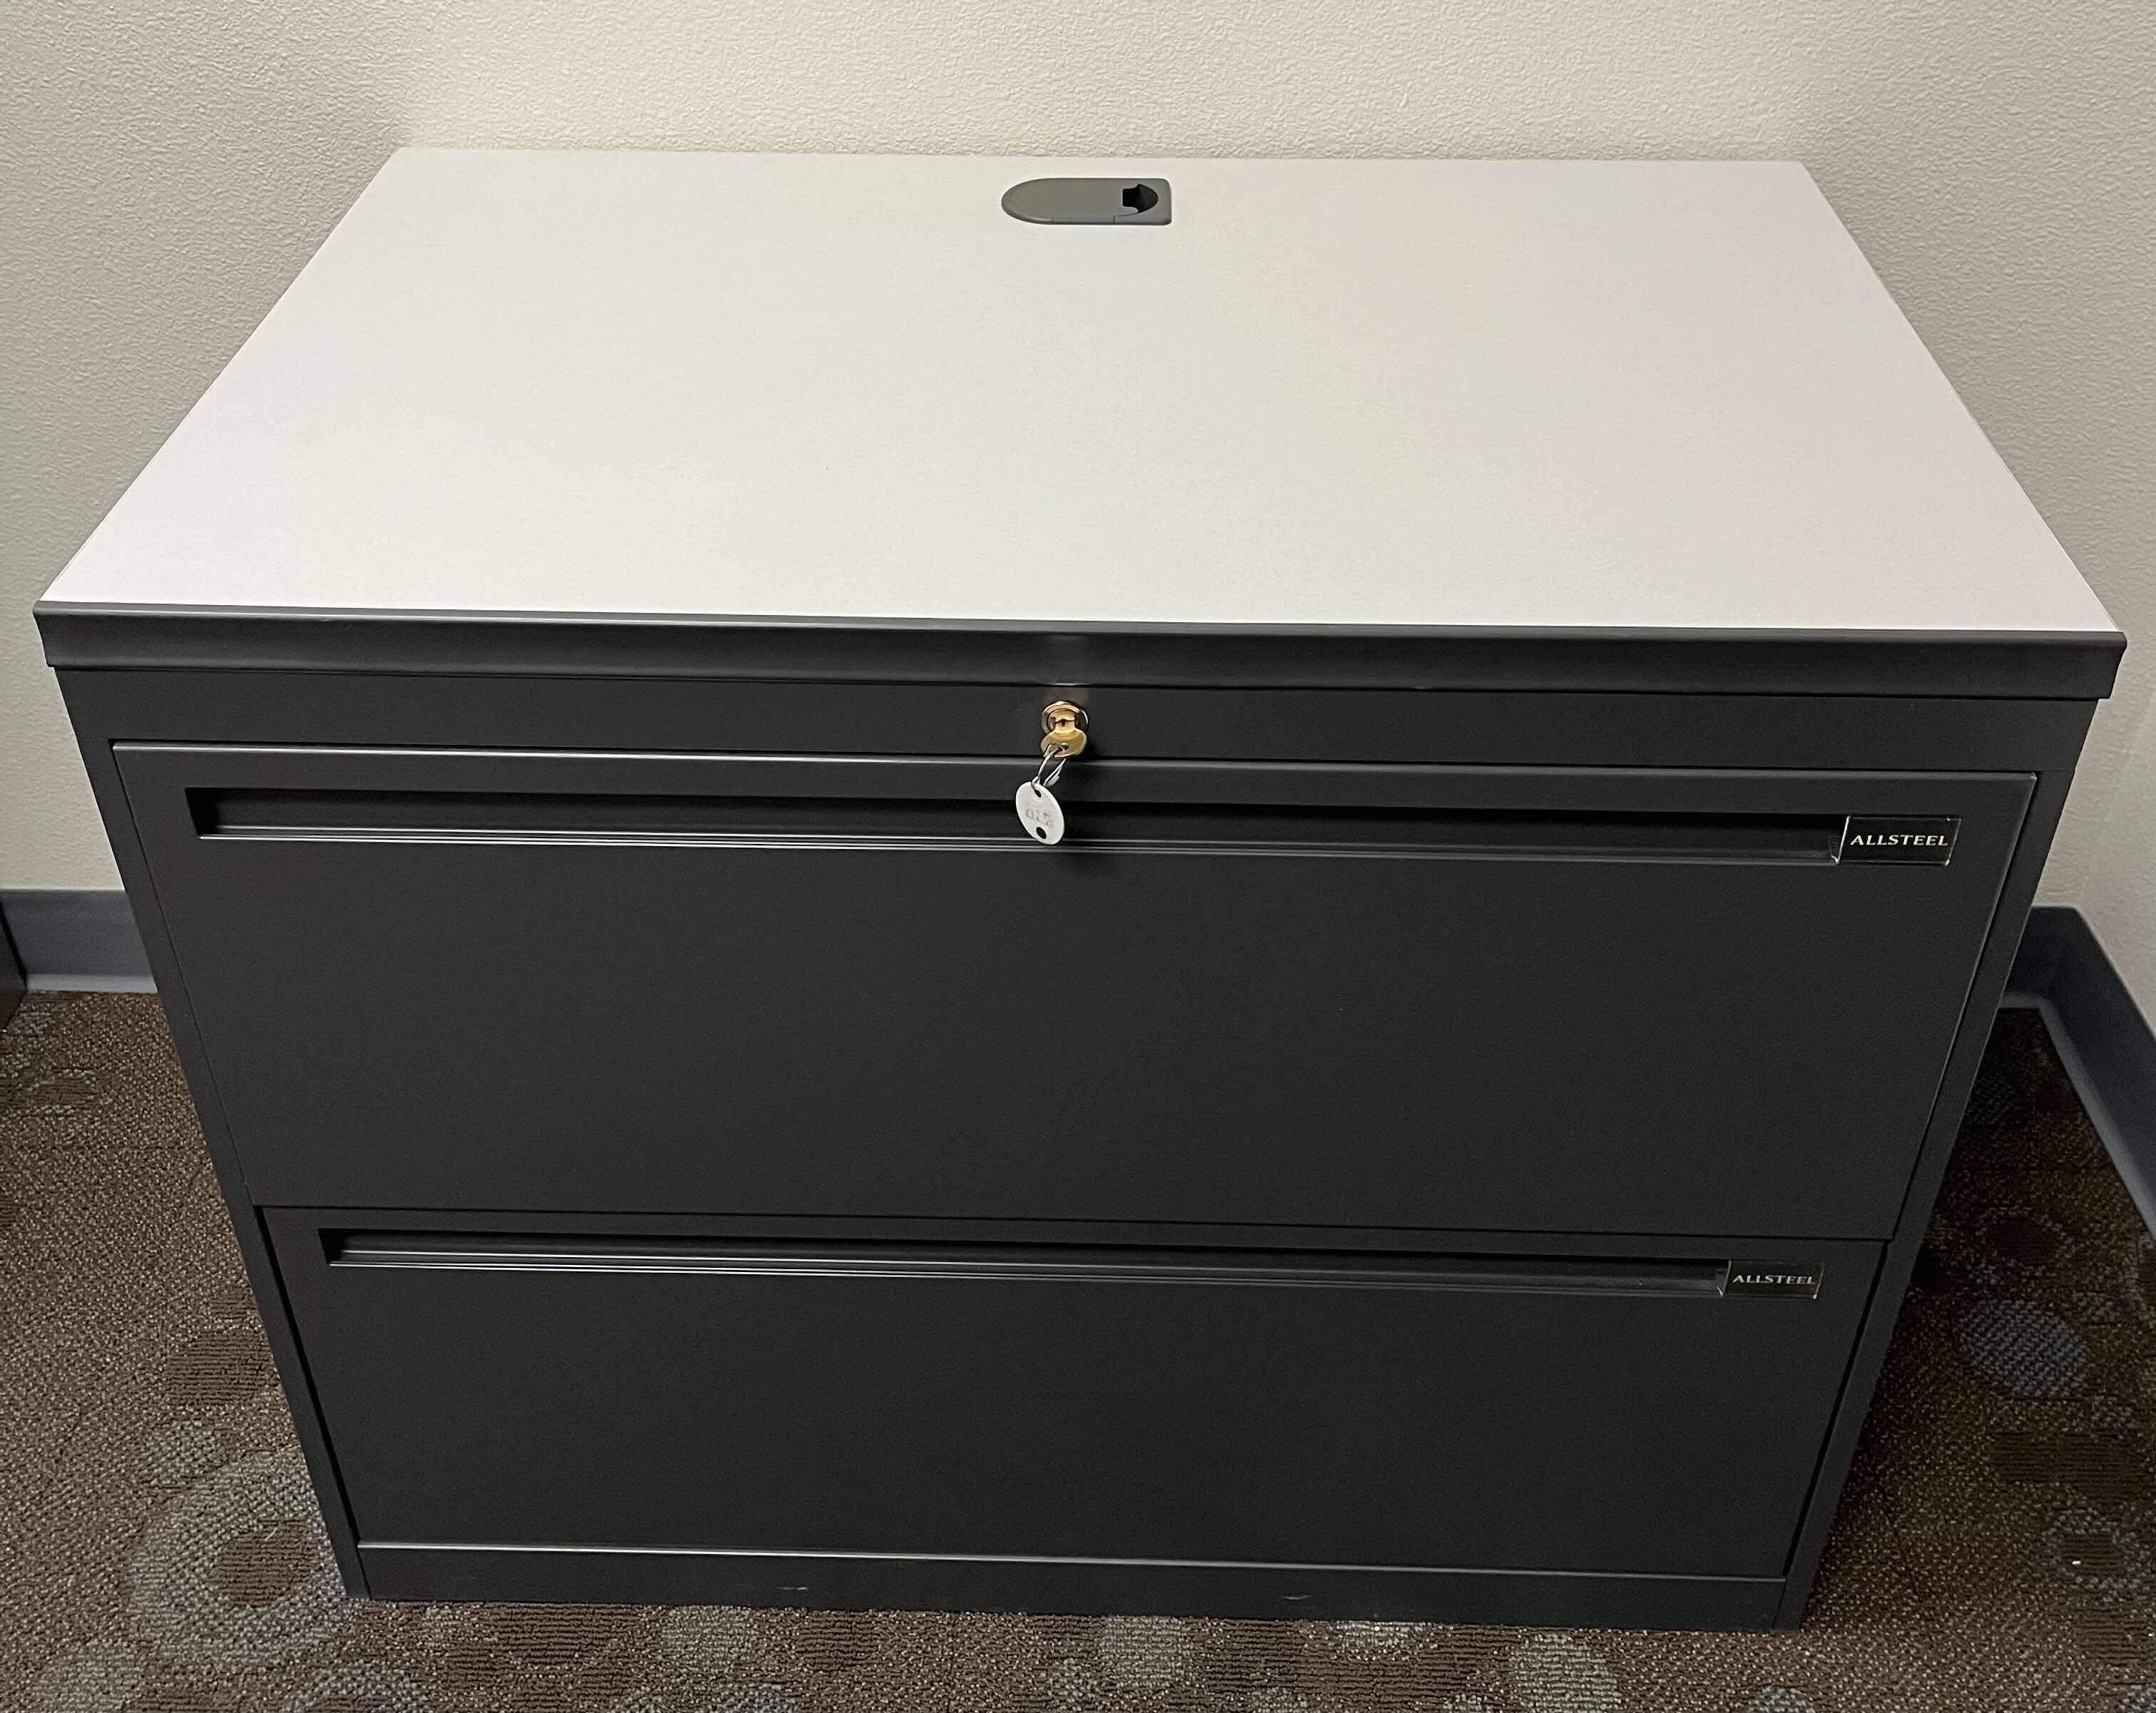 Photo 1 of ALL STEEL 2 DRAWER METAL LATERAL FILE CABINET W WORKSTATION TOP 36” X 23.5” H29”